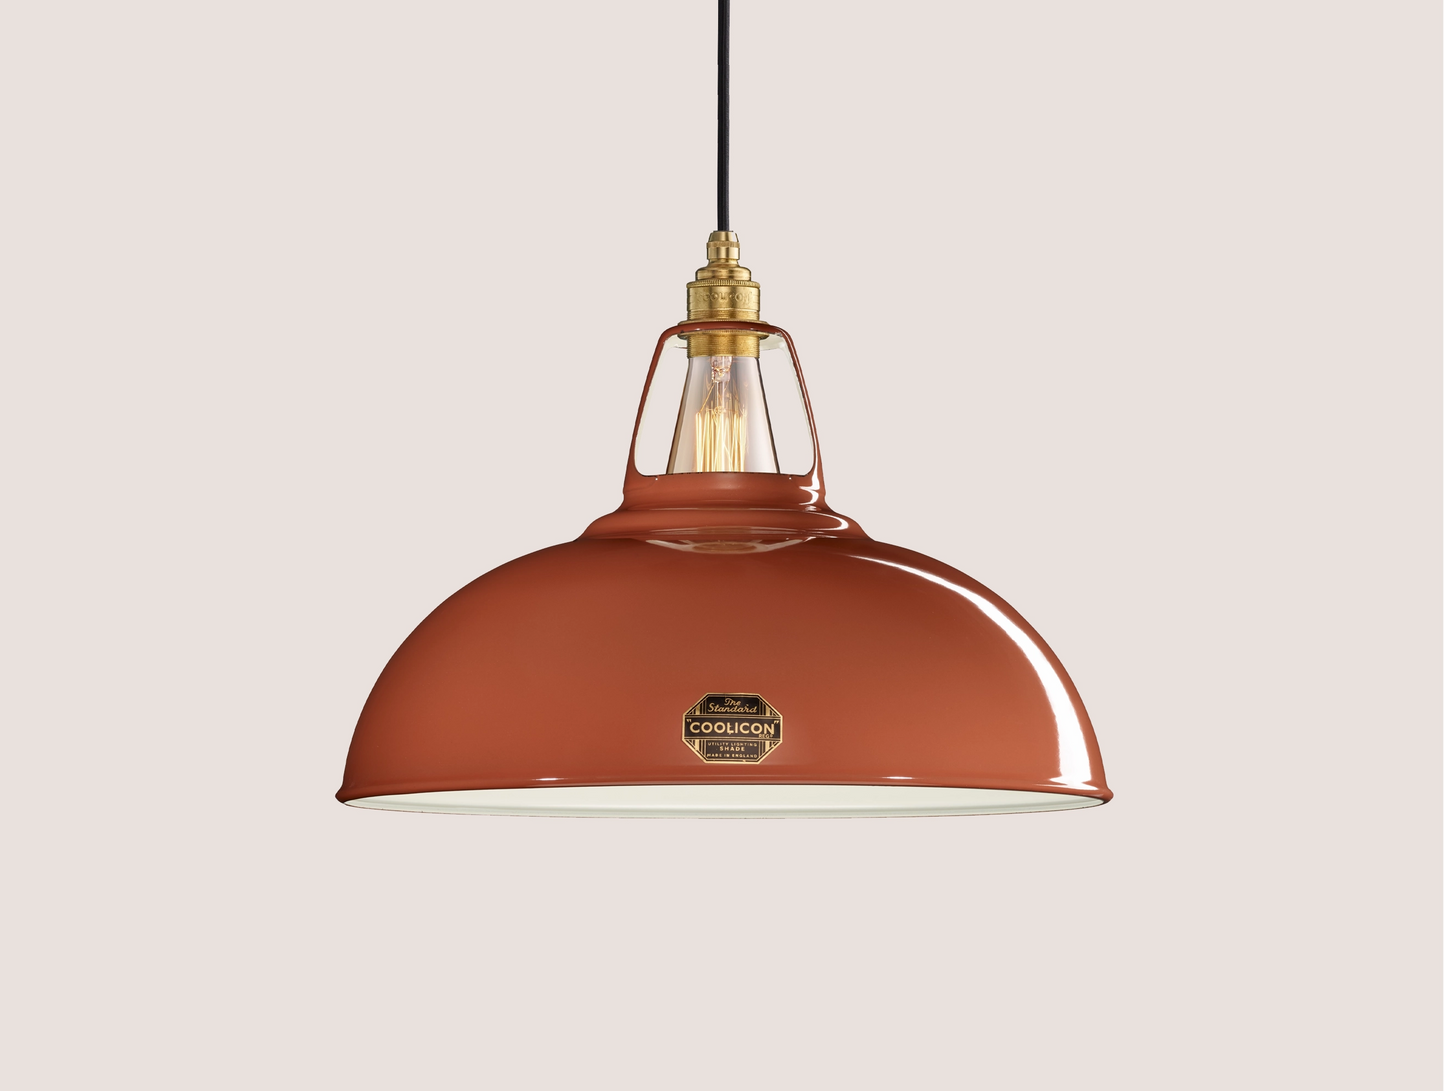 Large Terracotta Coolicon lampshade with a Brass pendant set over a light teal background